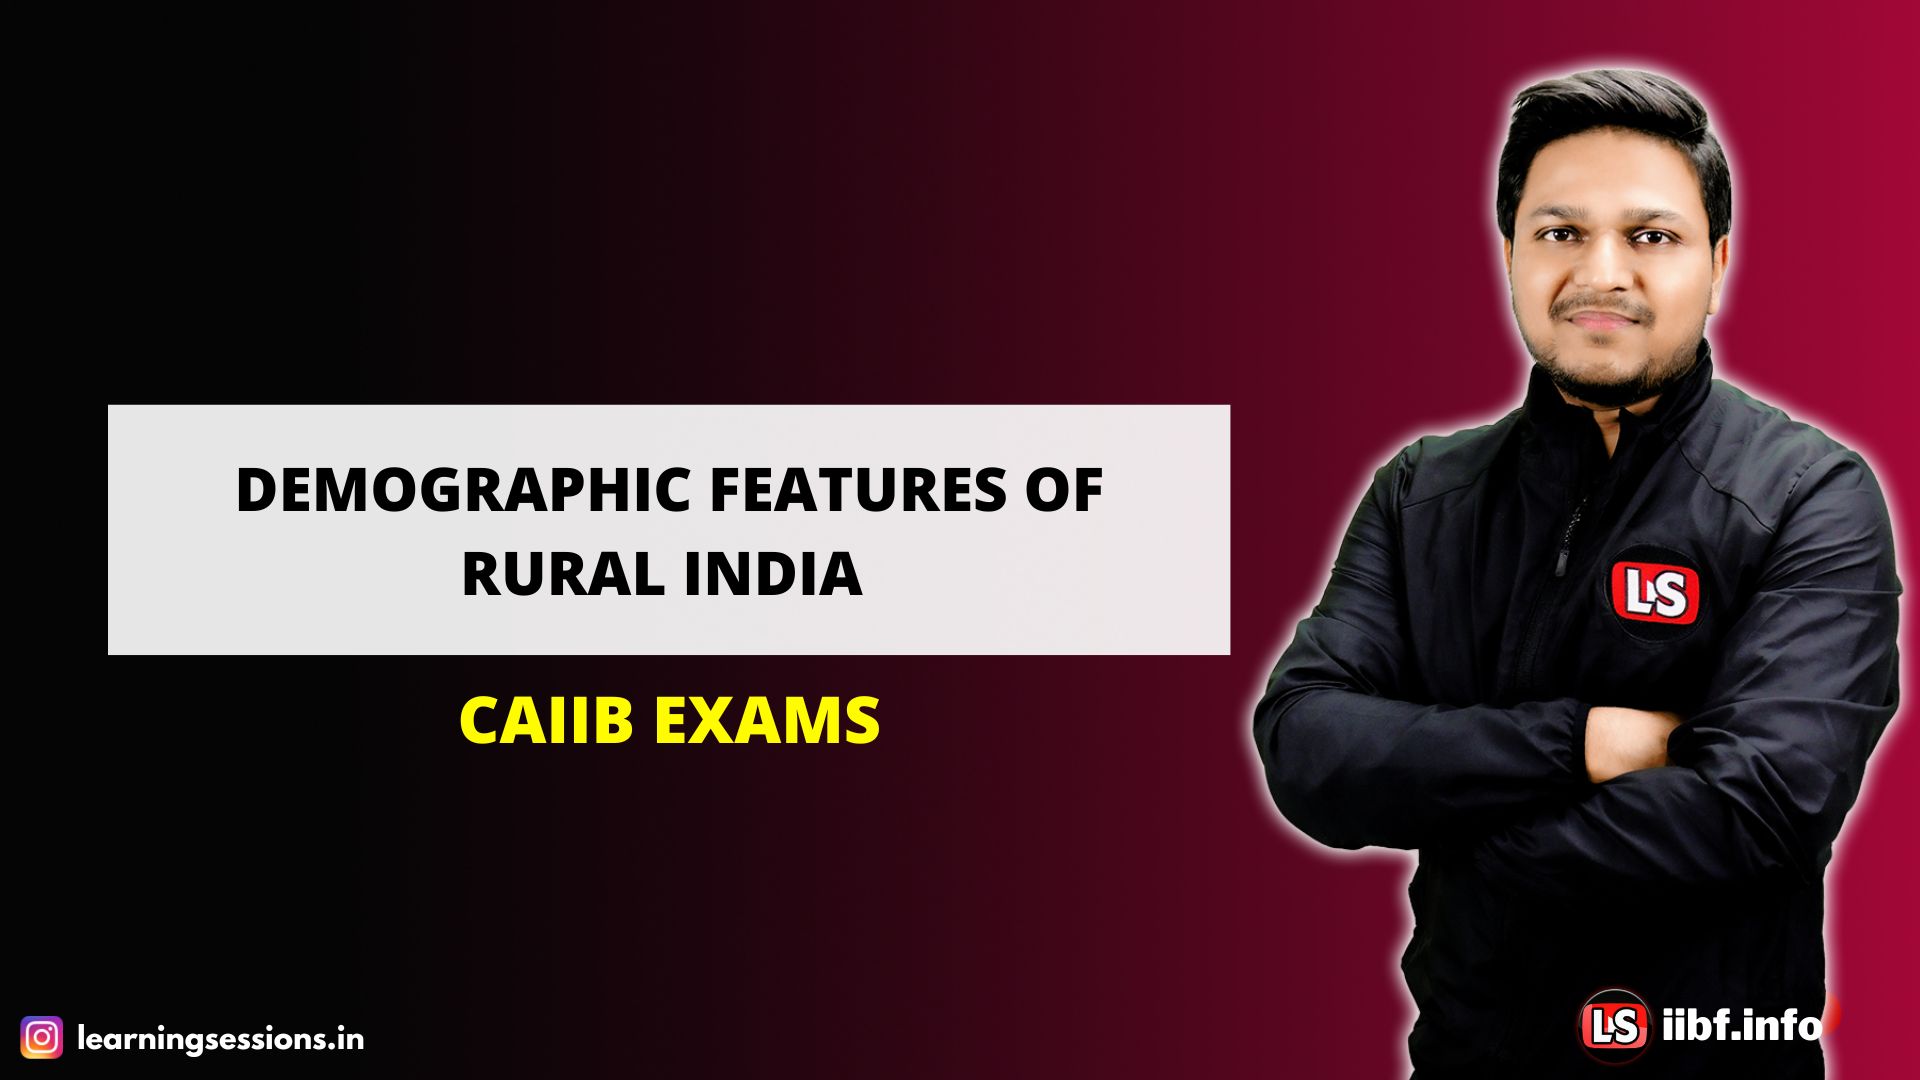 DEMOGRAPHIC FEATURES OF RURAL INDIA | CAIIB EXAMS